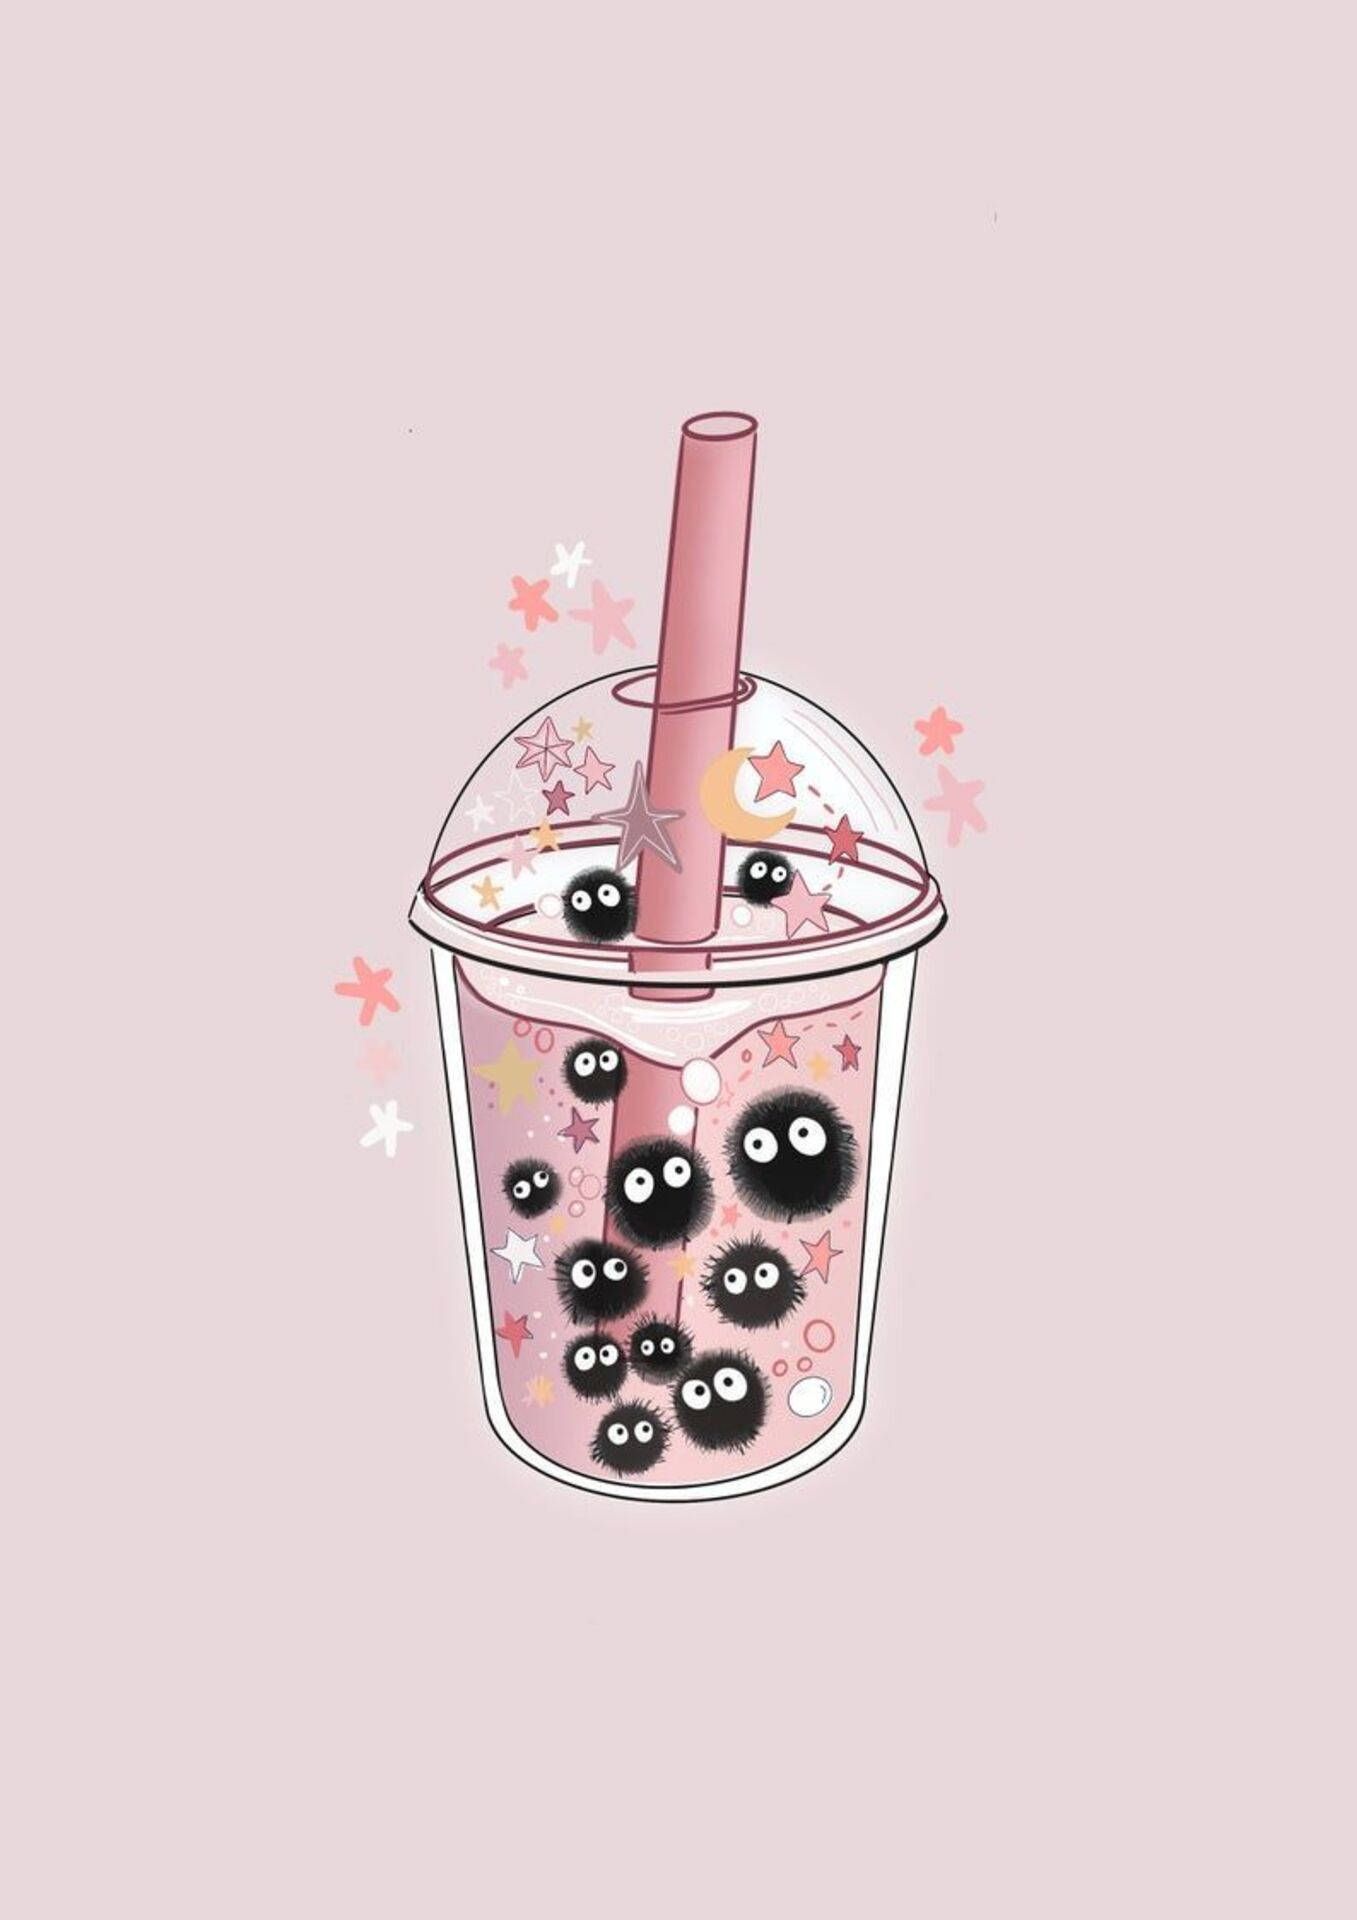 A cute boba drink with blackberries and stars - Boba, bubbles